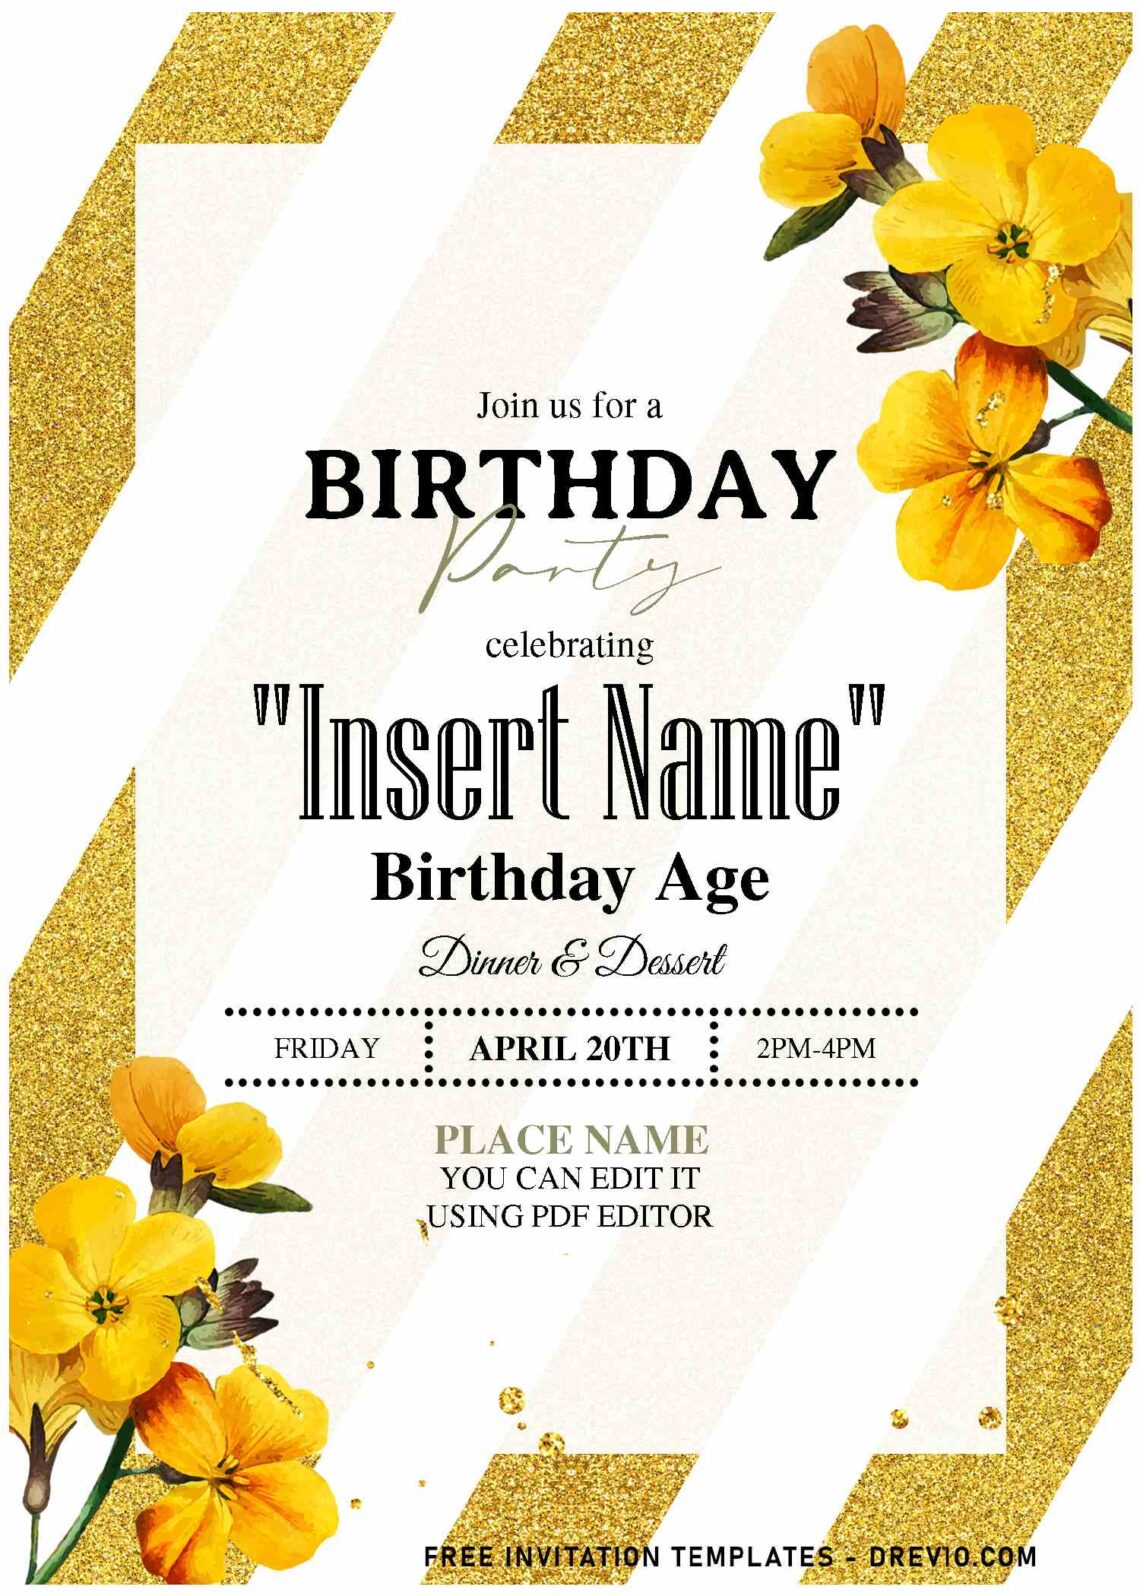 (Free Editable PDF) Shimmering Gold Glitter And Floral Invitation Templates with gorgeous yellow poppy